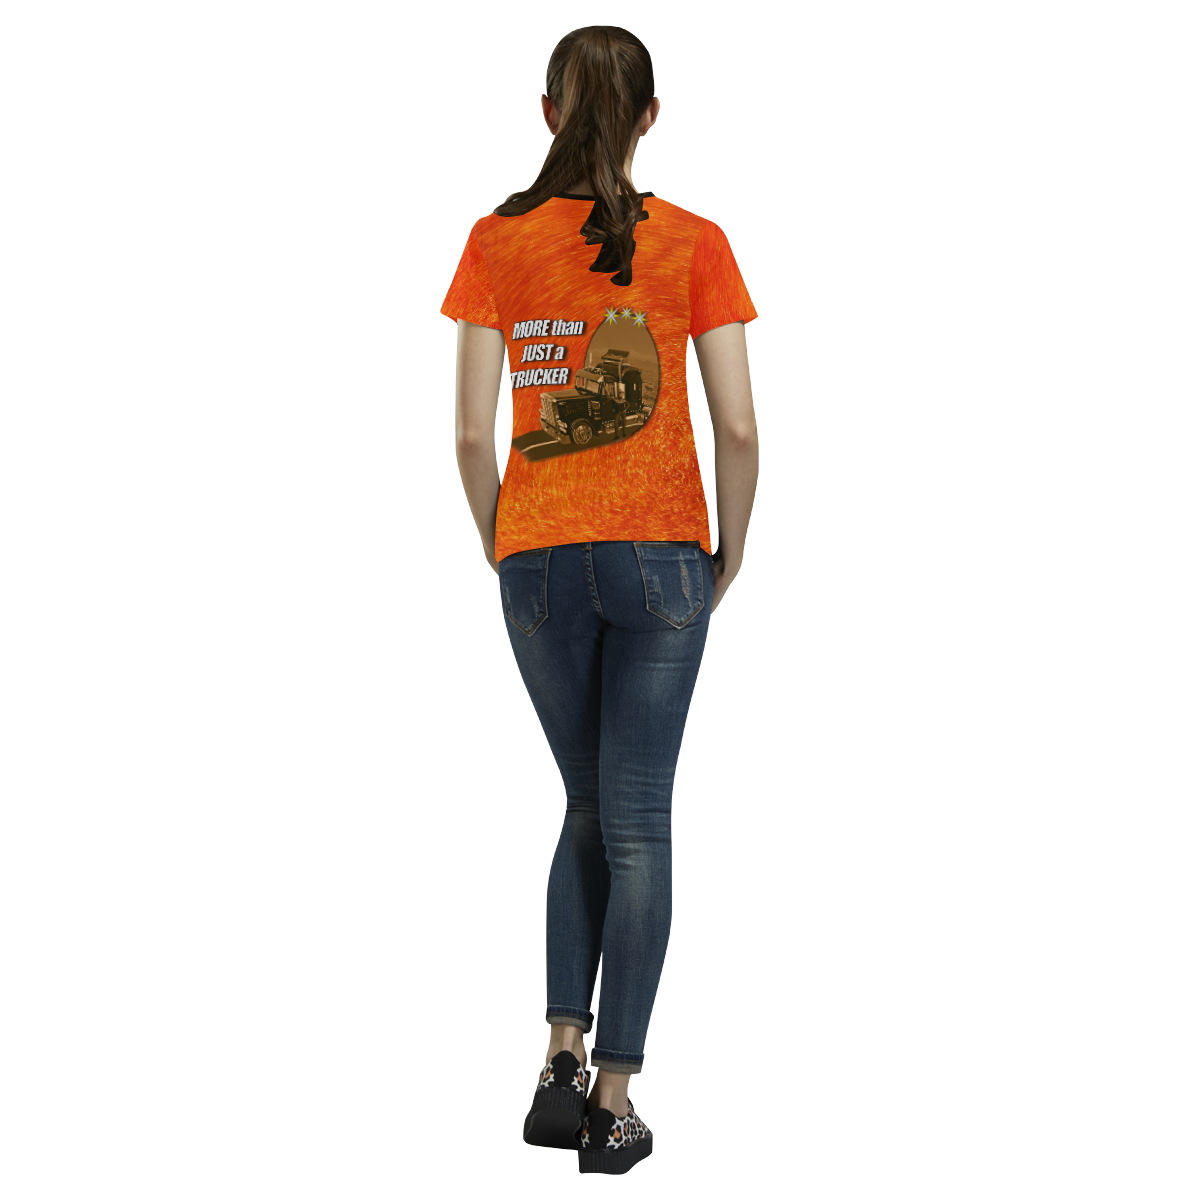 More than just a trucker All Over Print T-shirt for Women/Large Size (USA Size) (Model T40)